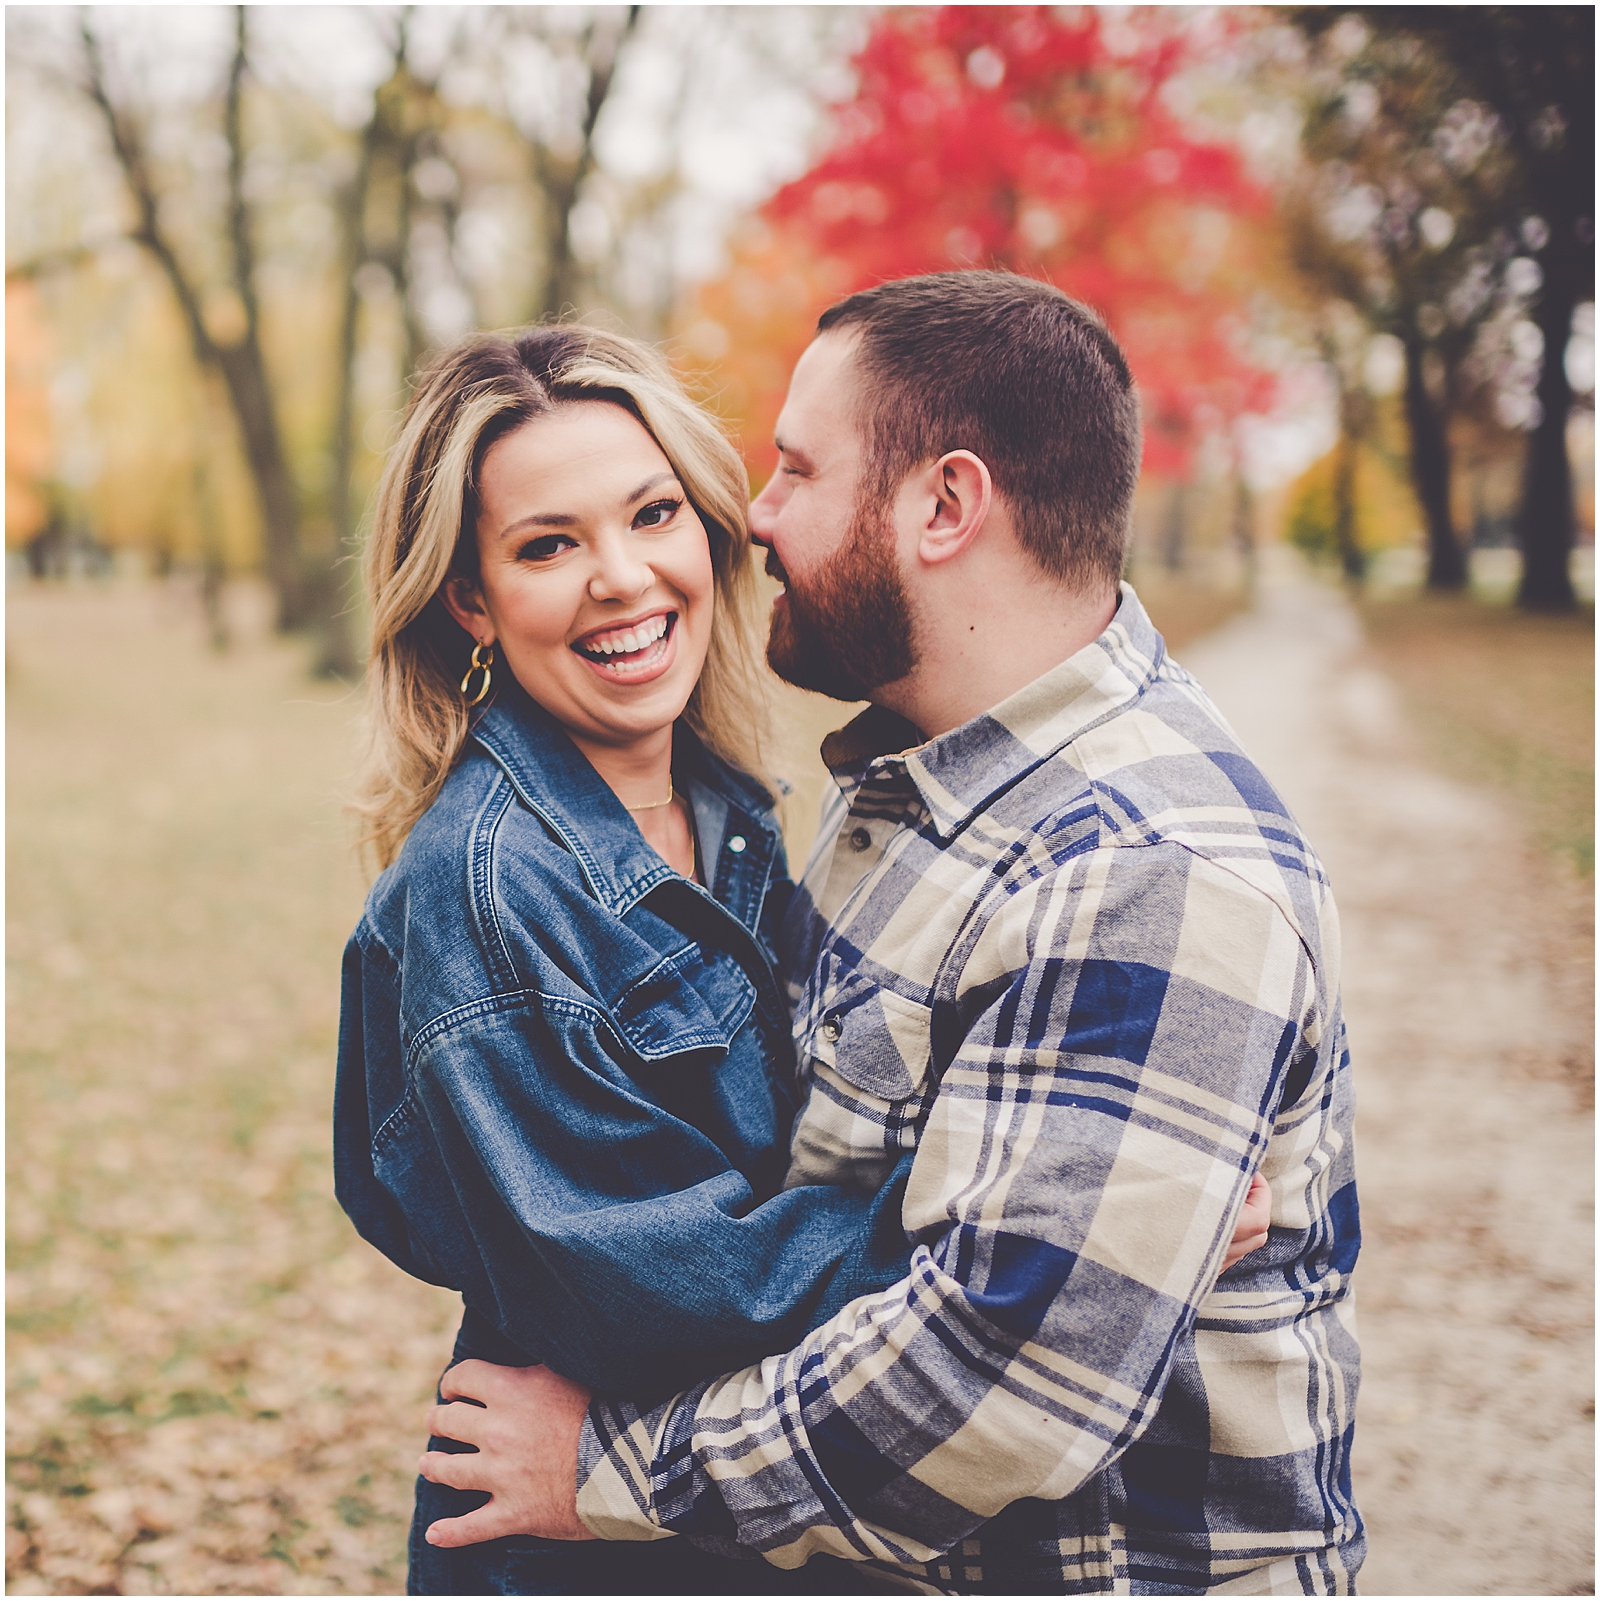 Fall mini sessions at Governor Small Memorial Park in Kankakee, Illinois with Chicagoland wedding photographer Kara Evans Photographer.